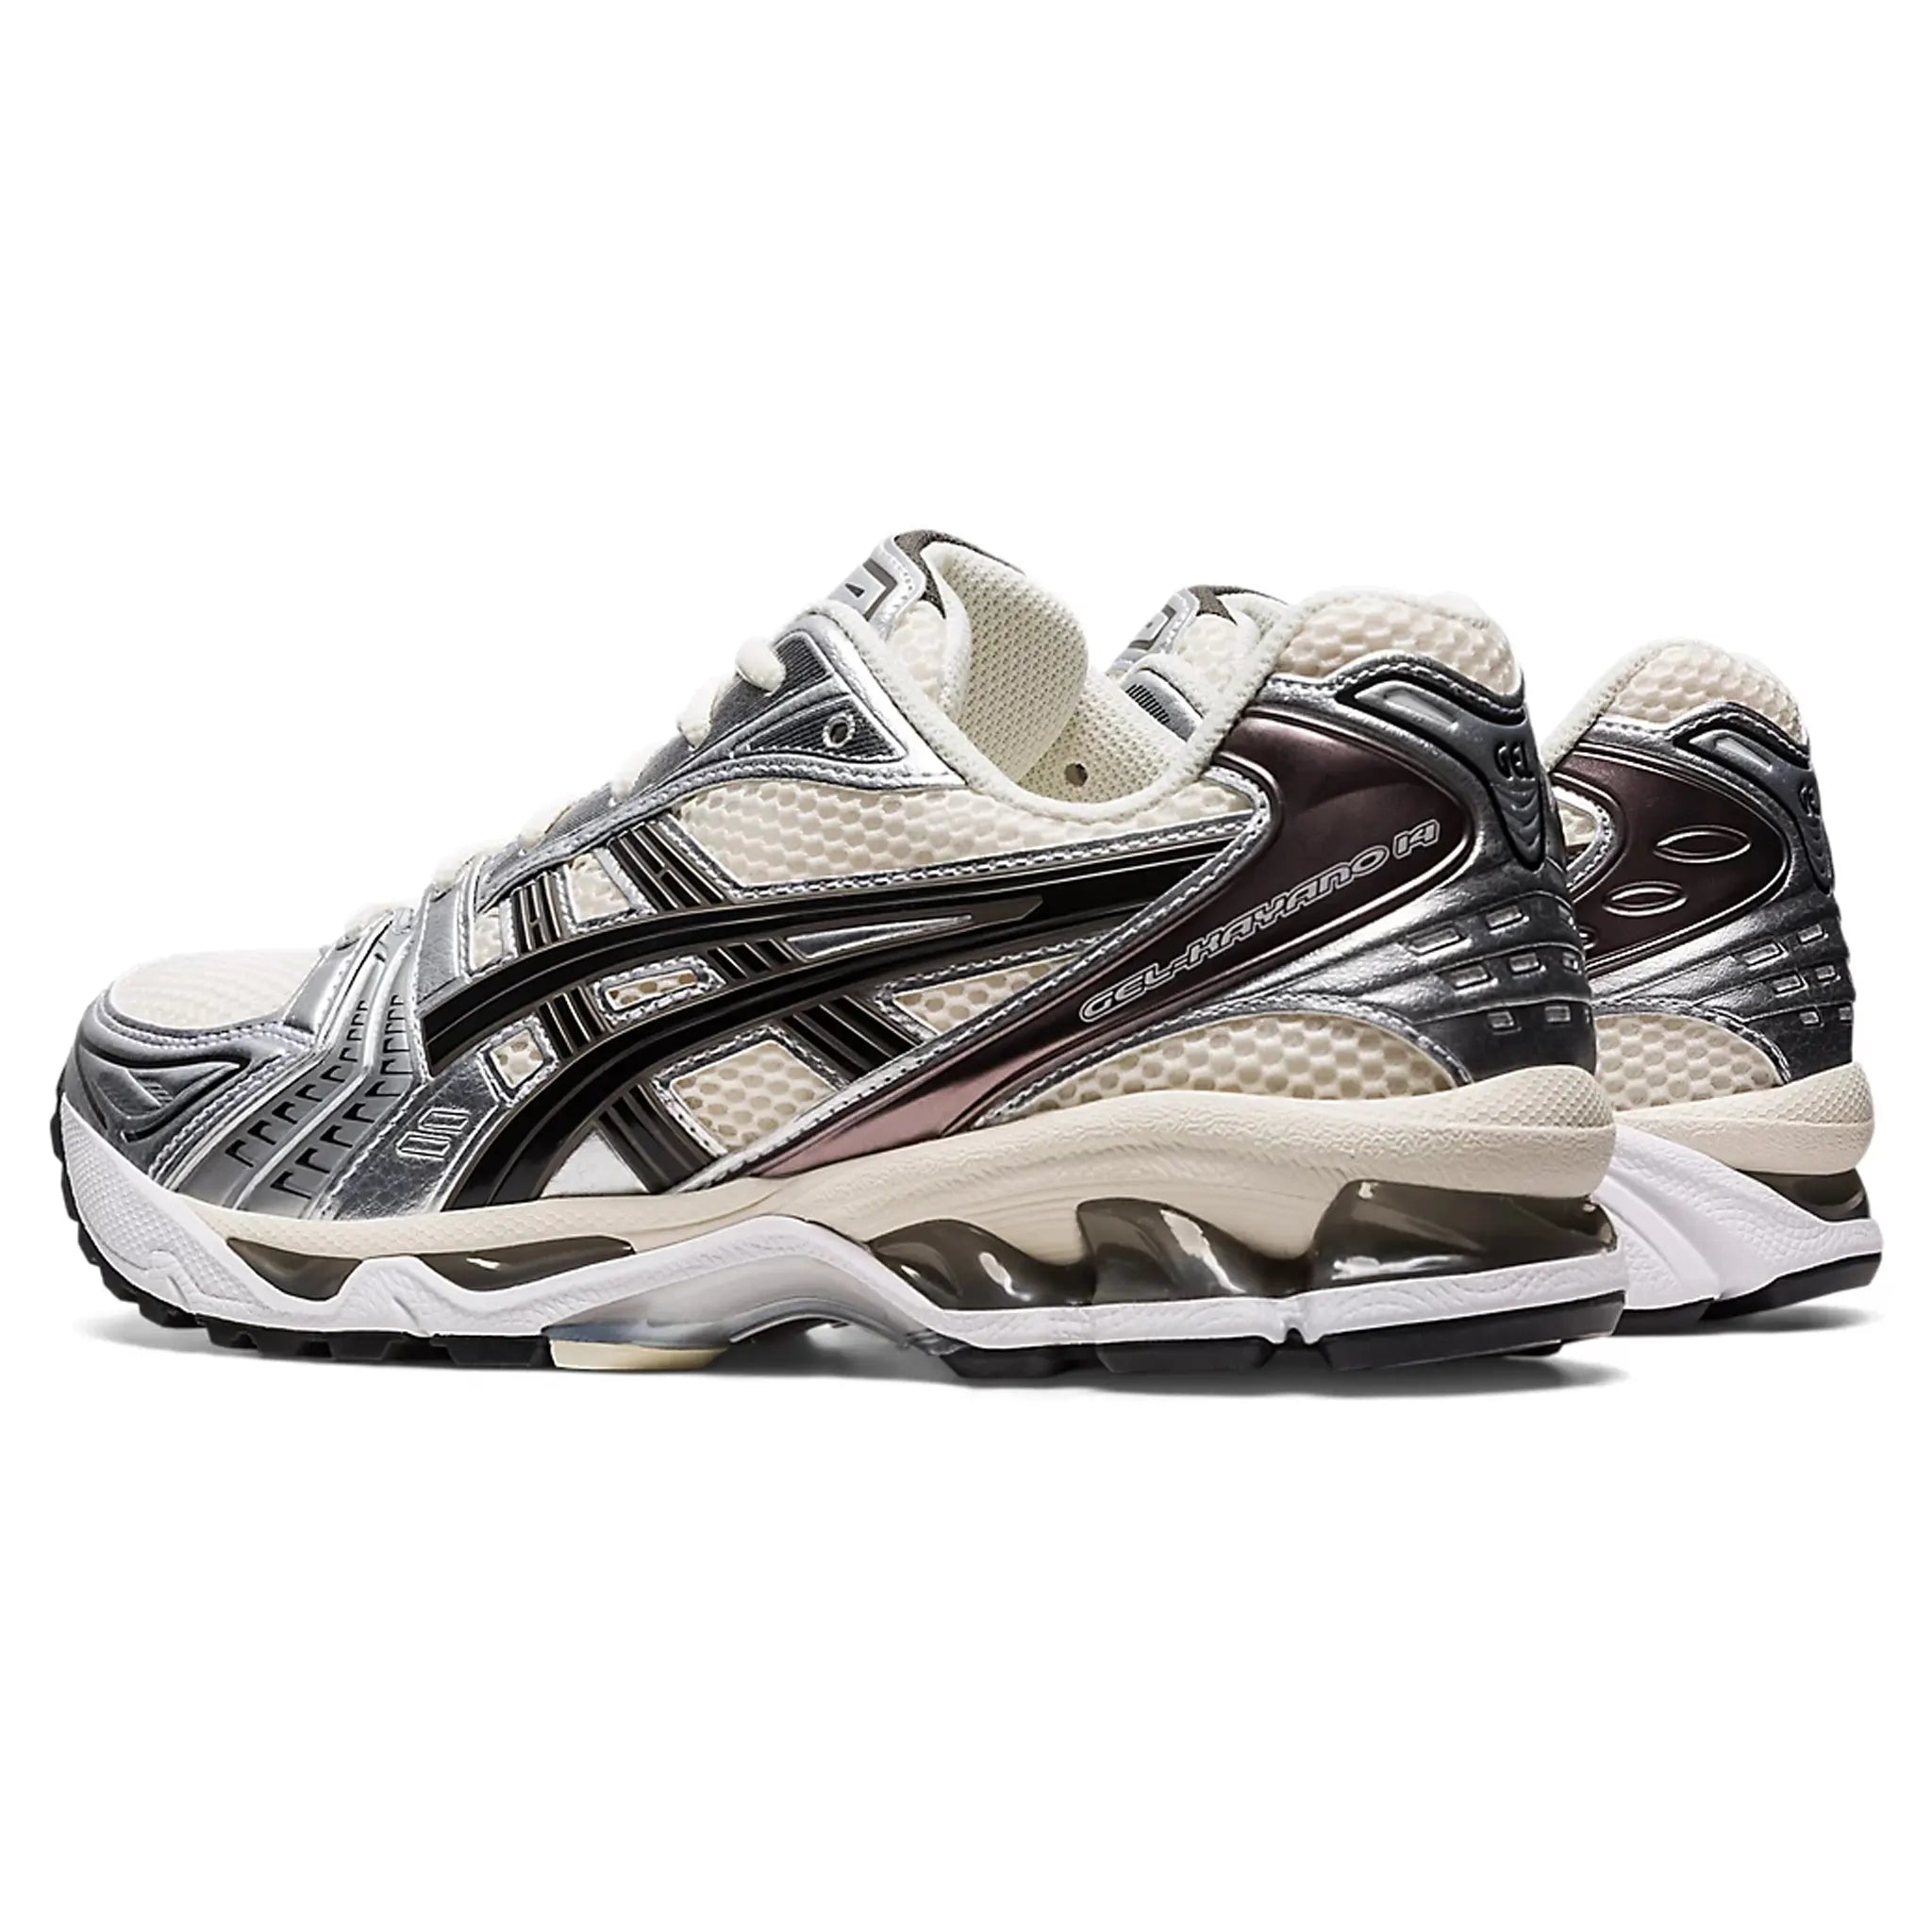 Back Side view of Asics Gel-Kayano 14 Silver Cream Black (W) 1201A019-108